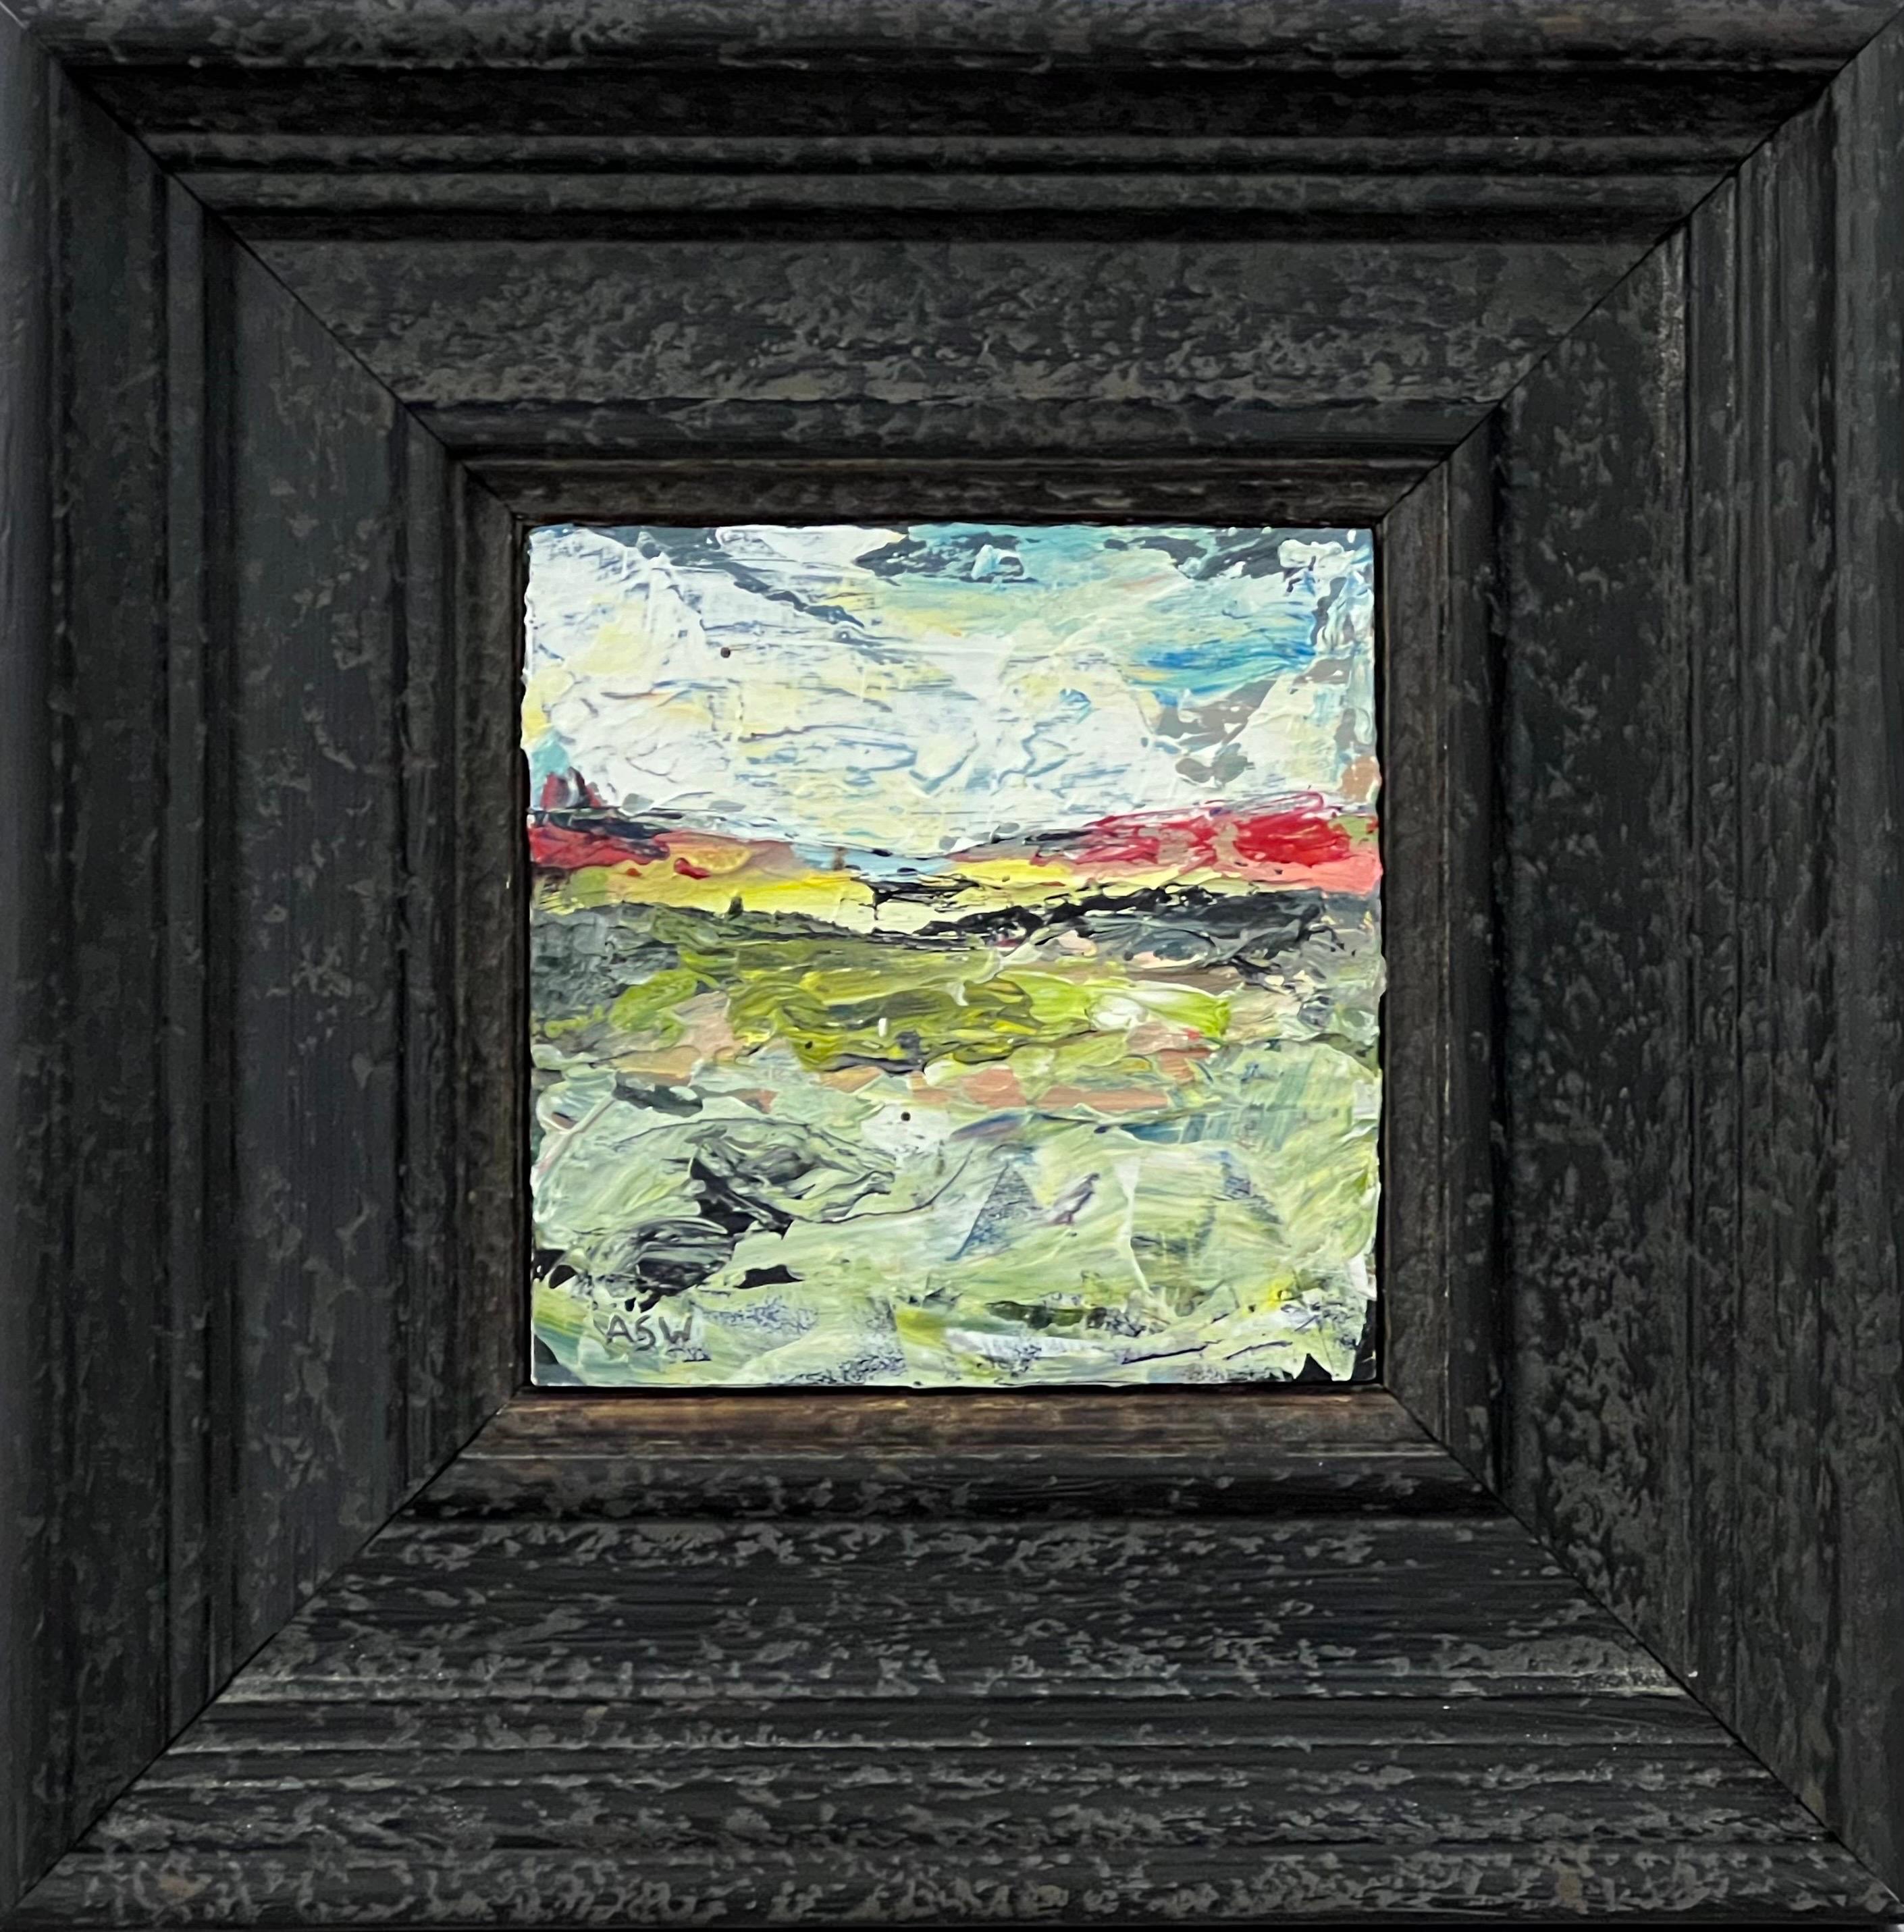 Impasto Abstract Seascape Landscape Miniature Study by Contemporary British Artist Angela Wakefield

Art measures 5 x 5 inches
Frame measures 11 x 11 inches 

Framed in a high quality off-black moulding 

Angela Wakefield has twice been on the front